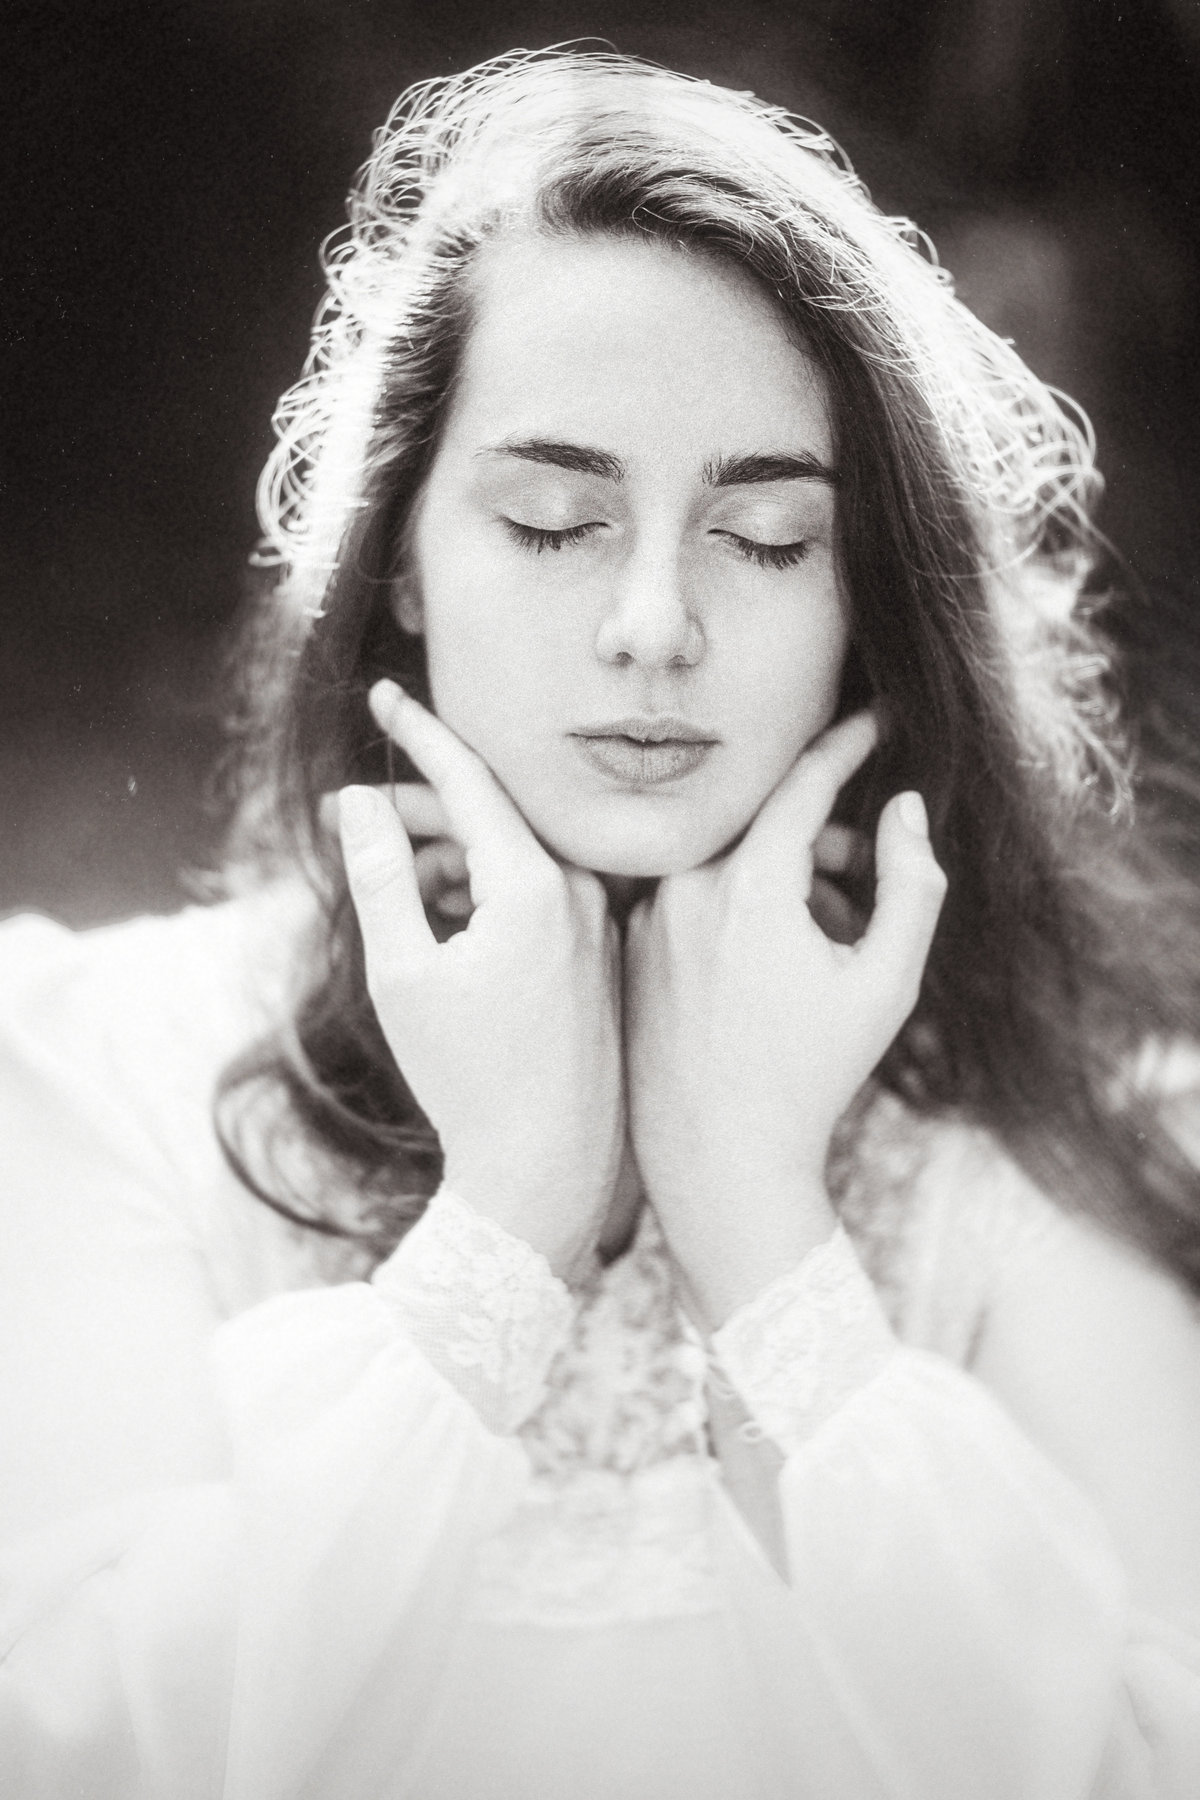 Portrait Photo Of Young Woman In Dress With Her Eyes Closed Black And White Los Angeles